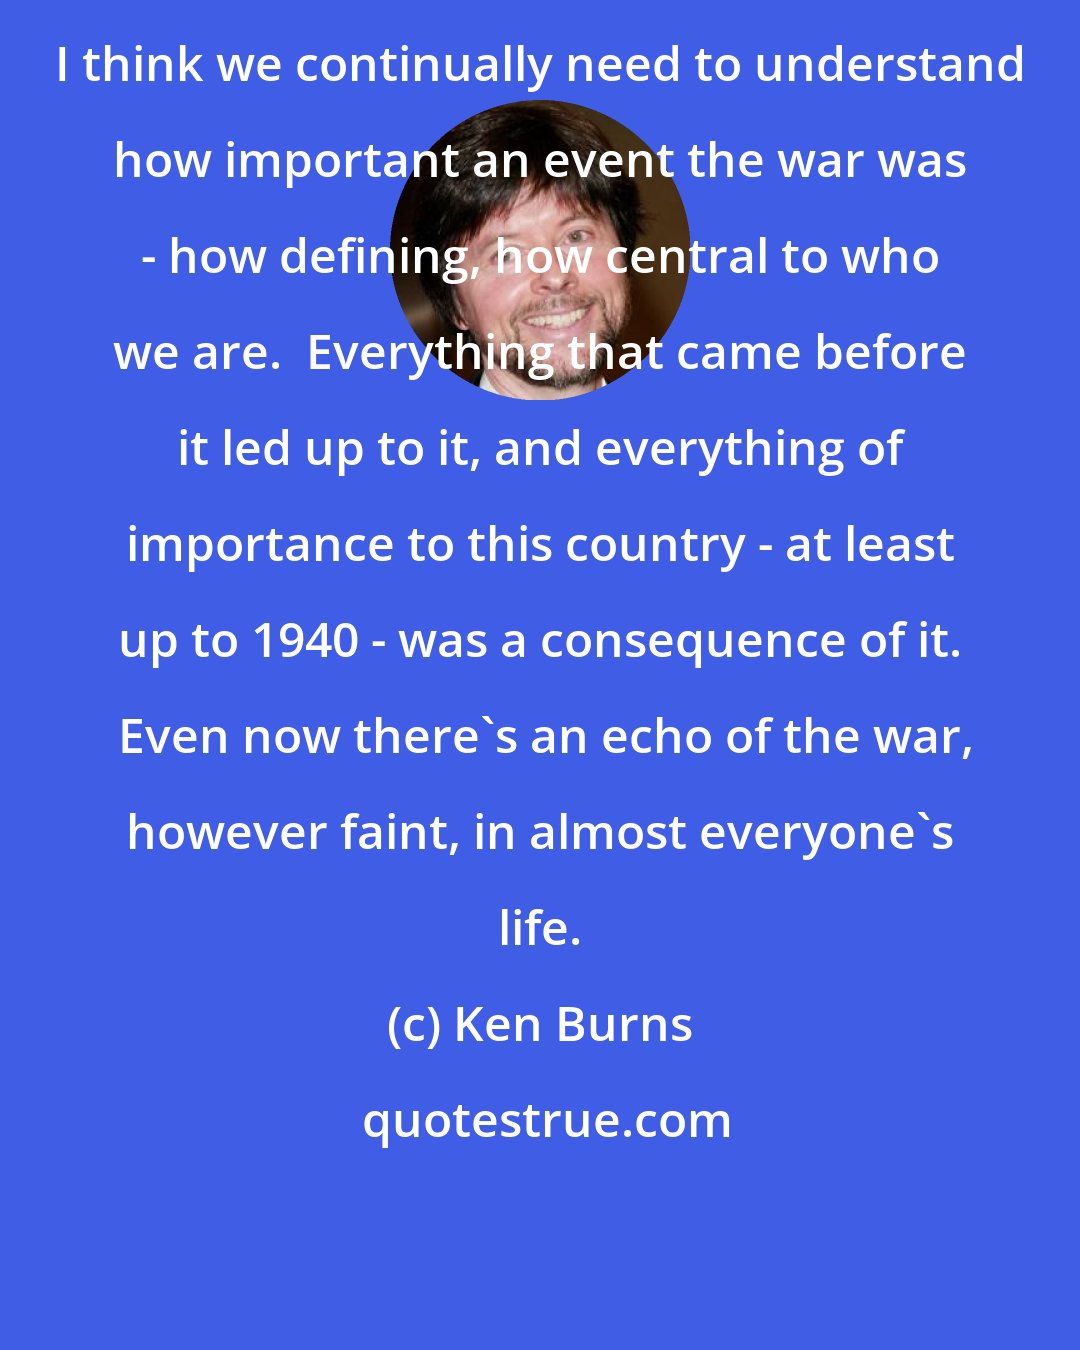 Ken Burns: I think we continually need to understand how important an event the war was - how defining, how central to who we are.  Everything that came before it led up to it, and everything of importance to this country - at least up to 1940 - was a consequence of it.  Even now there's an echo of the war, however faint, in almost everyone's life.